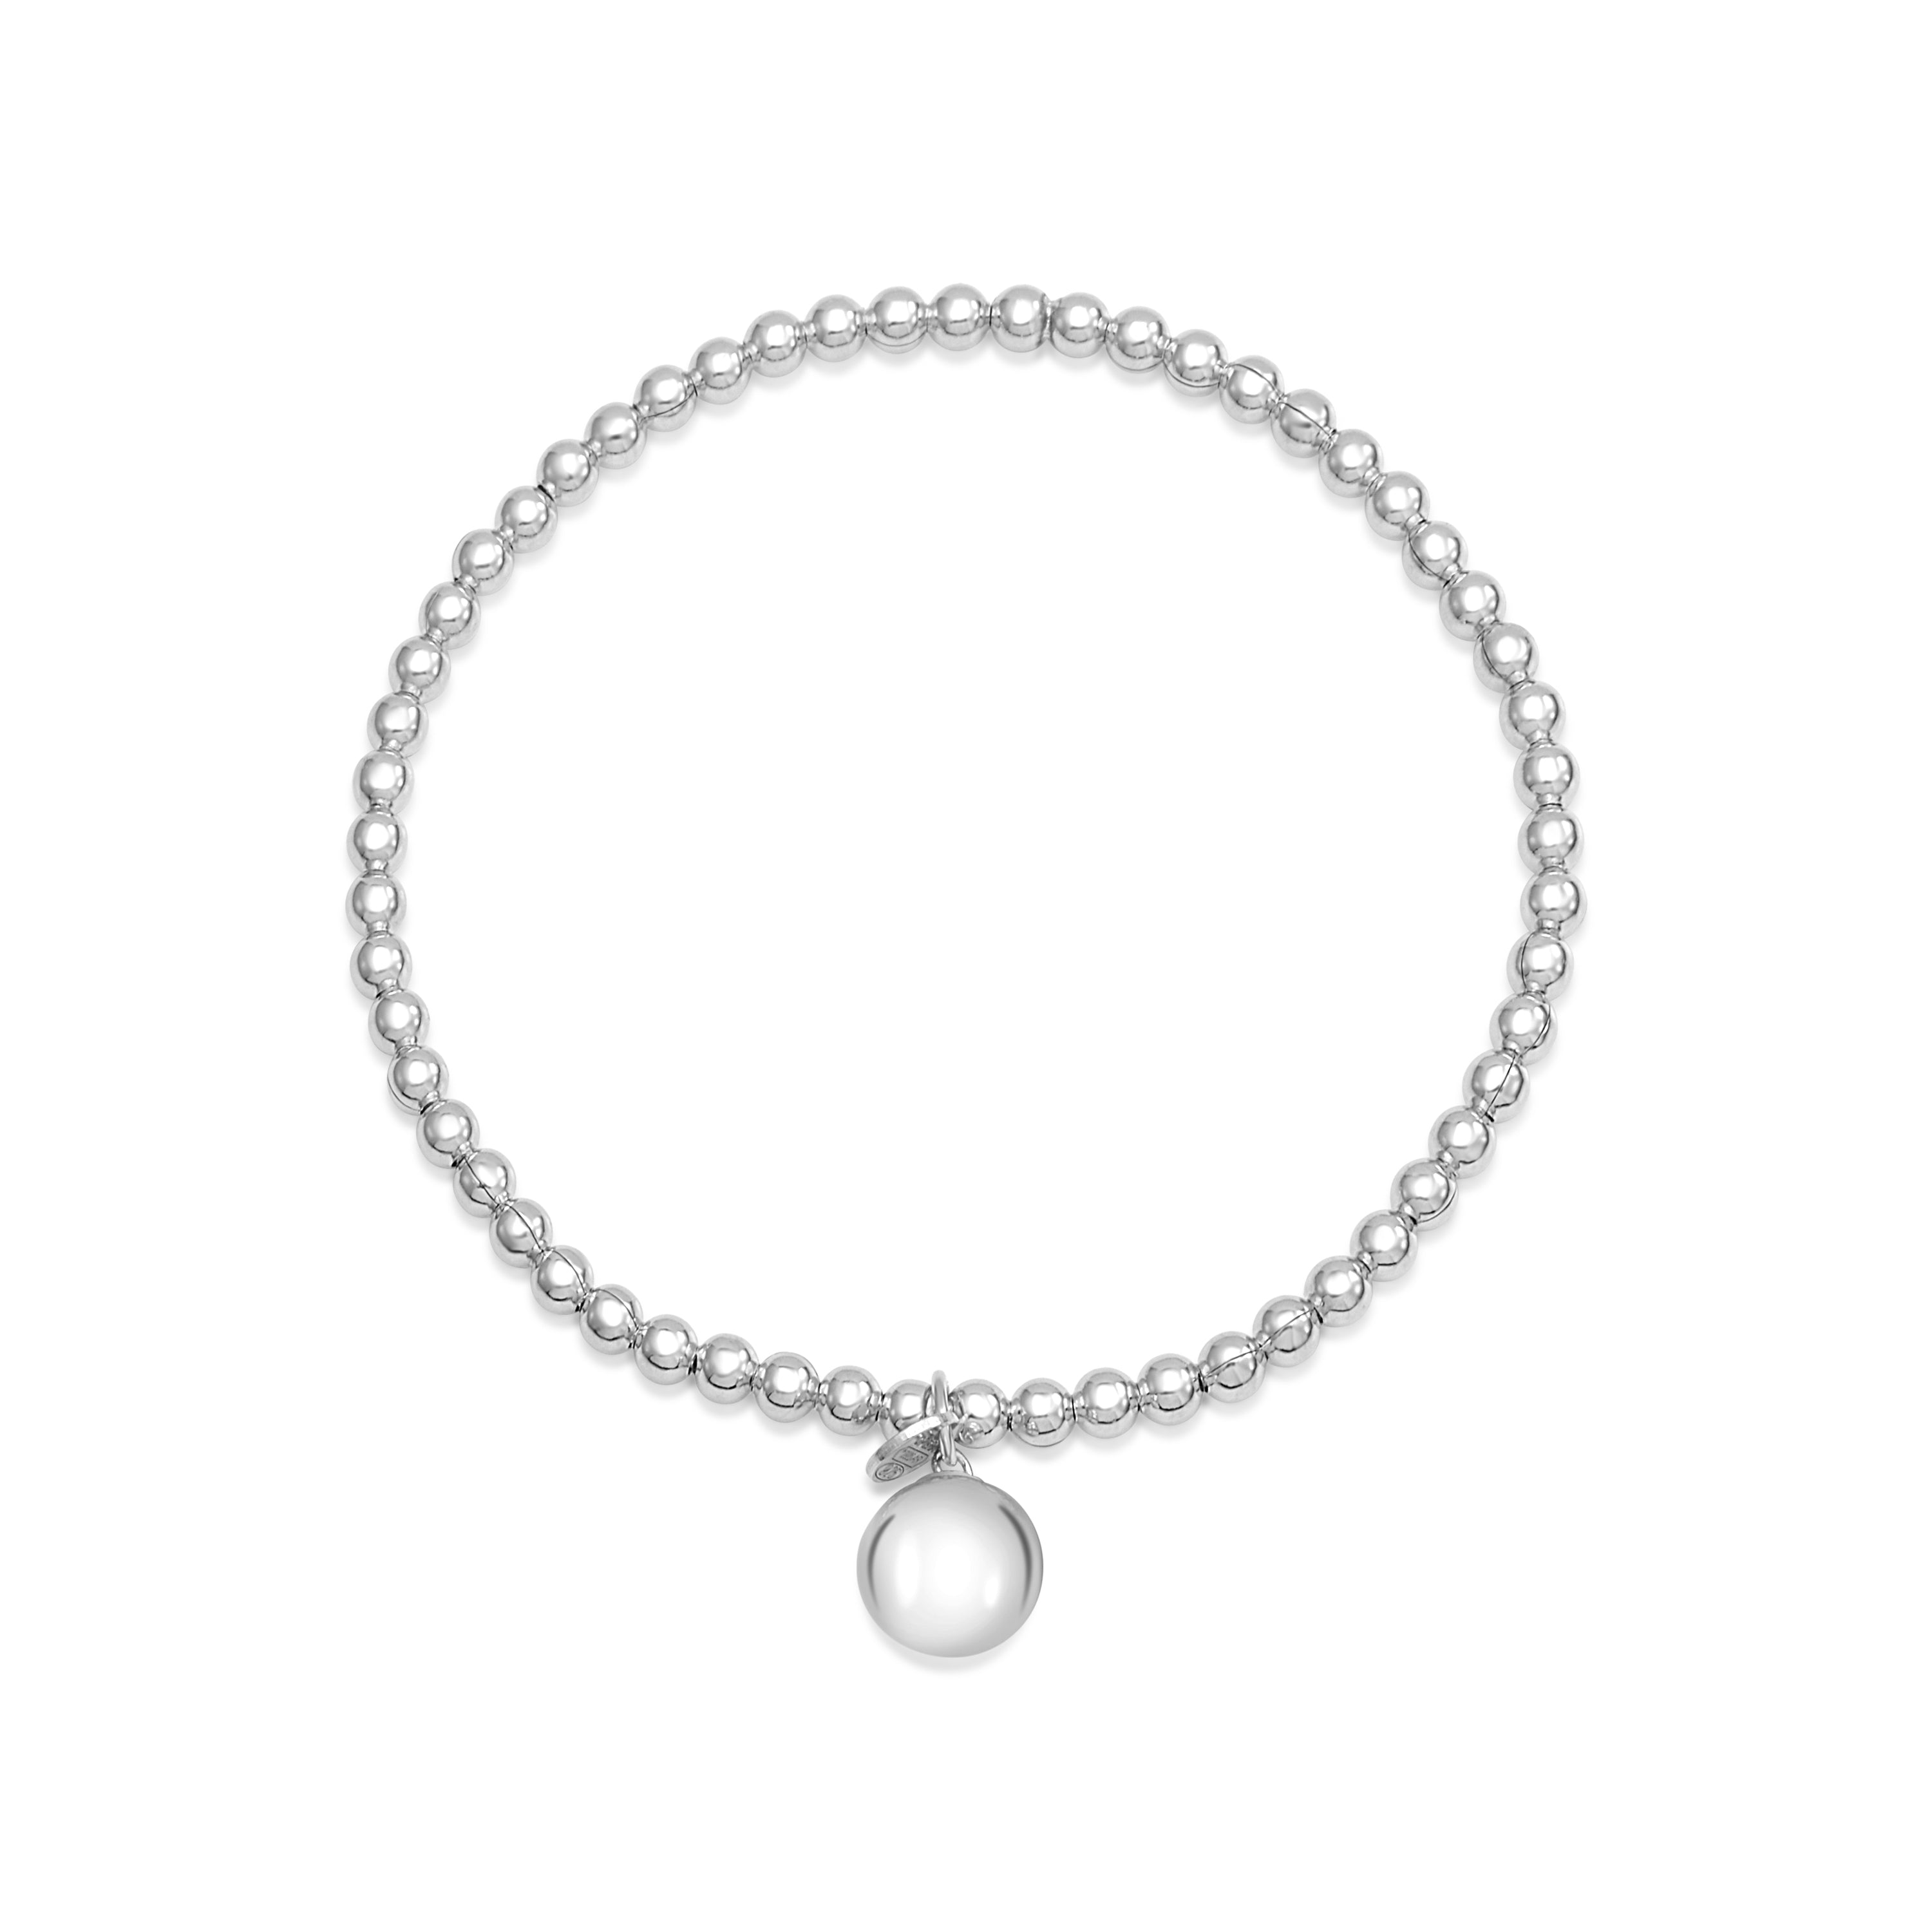 Sterling Silver 925 Polished Bead Stretch Bracelet with Ball Accent Charm